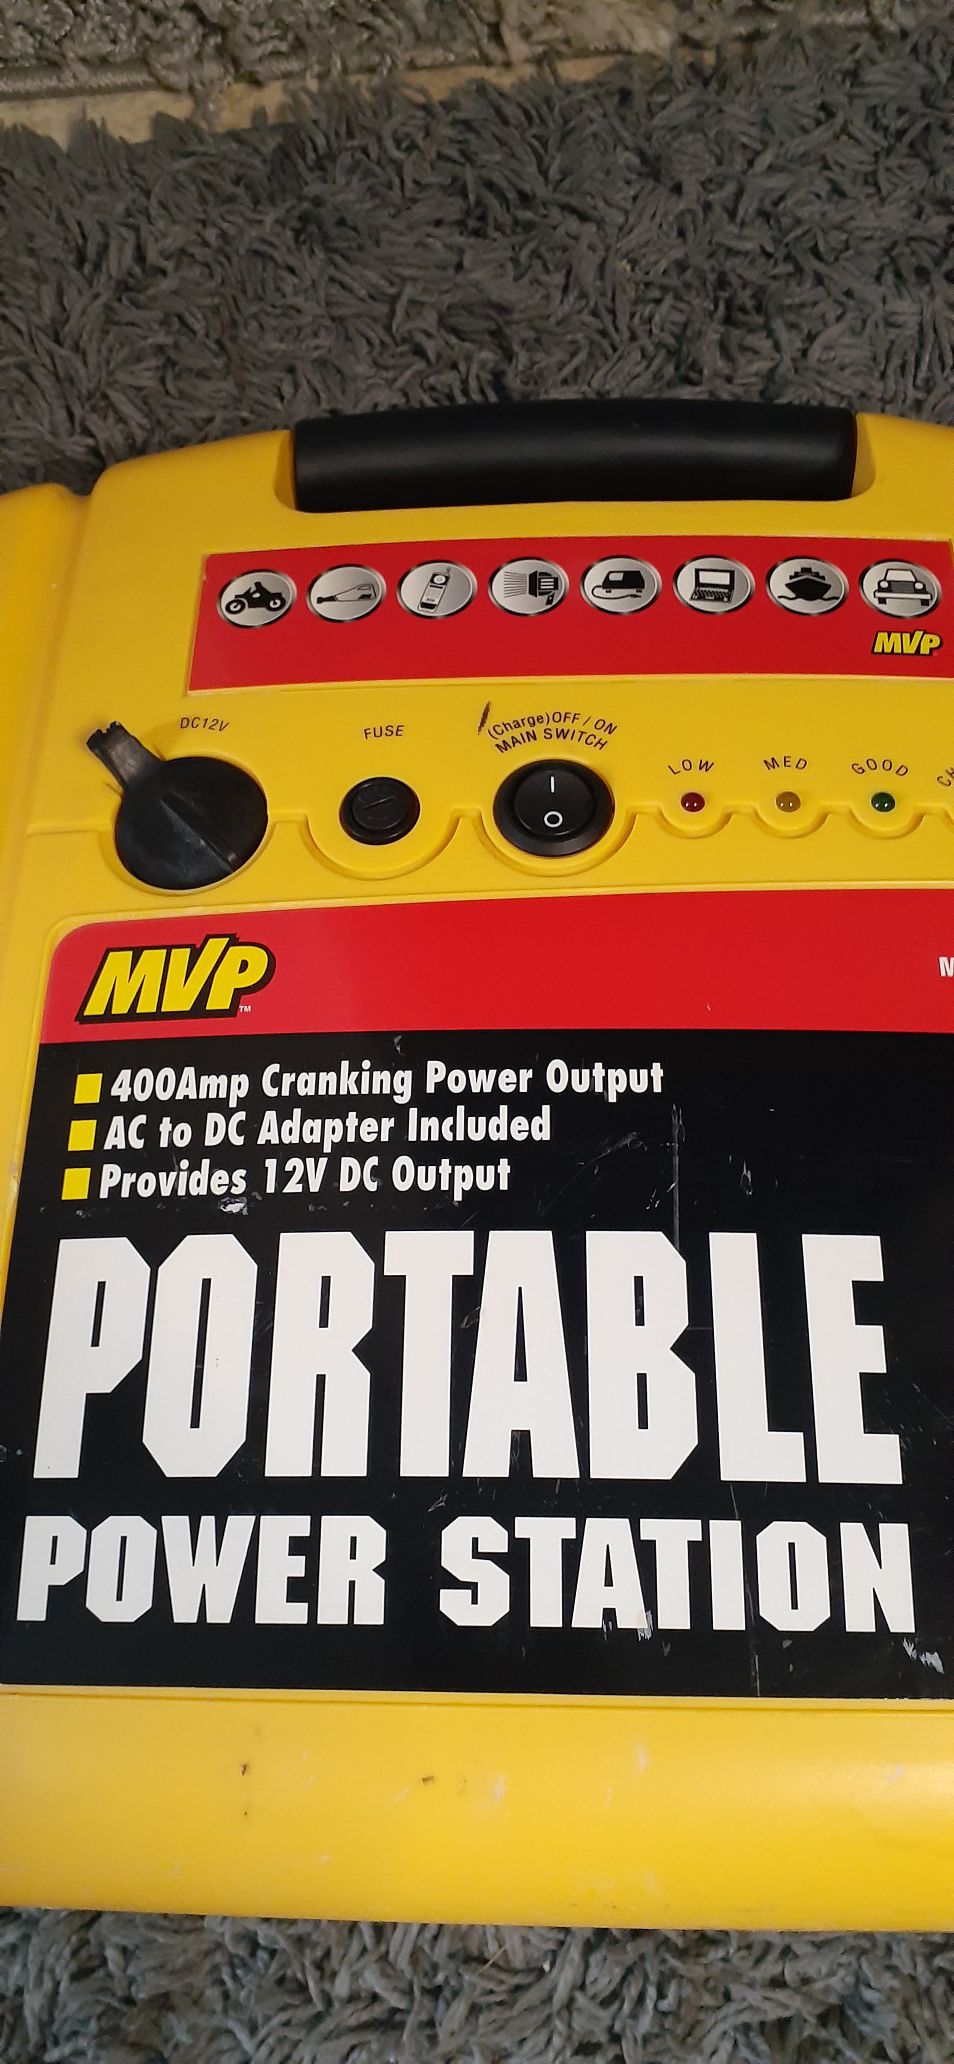 Portable power station for jump starting cars shipping with offerup